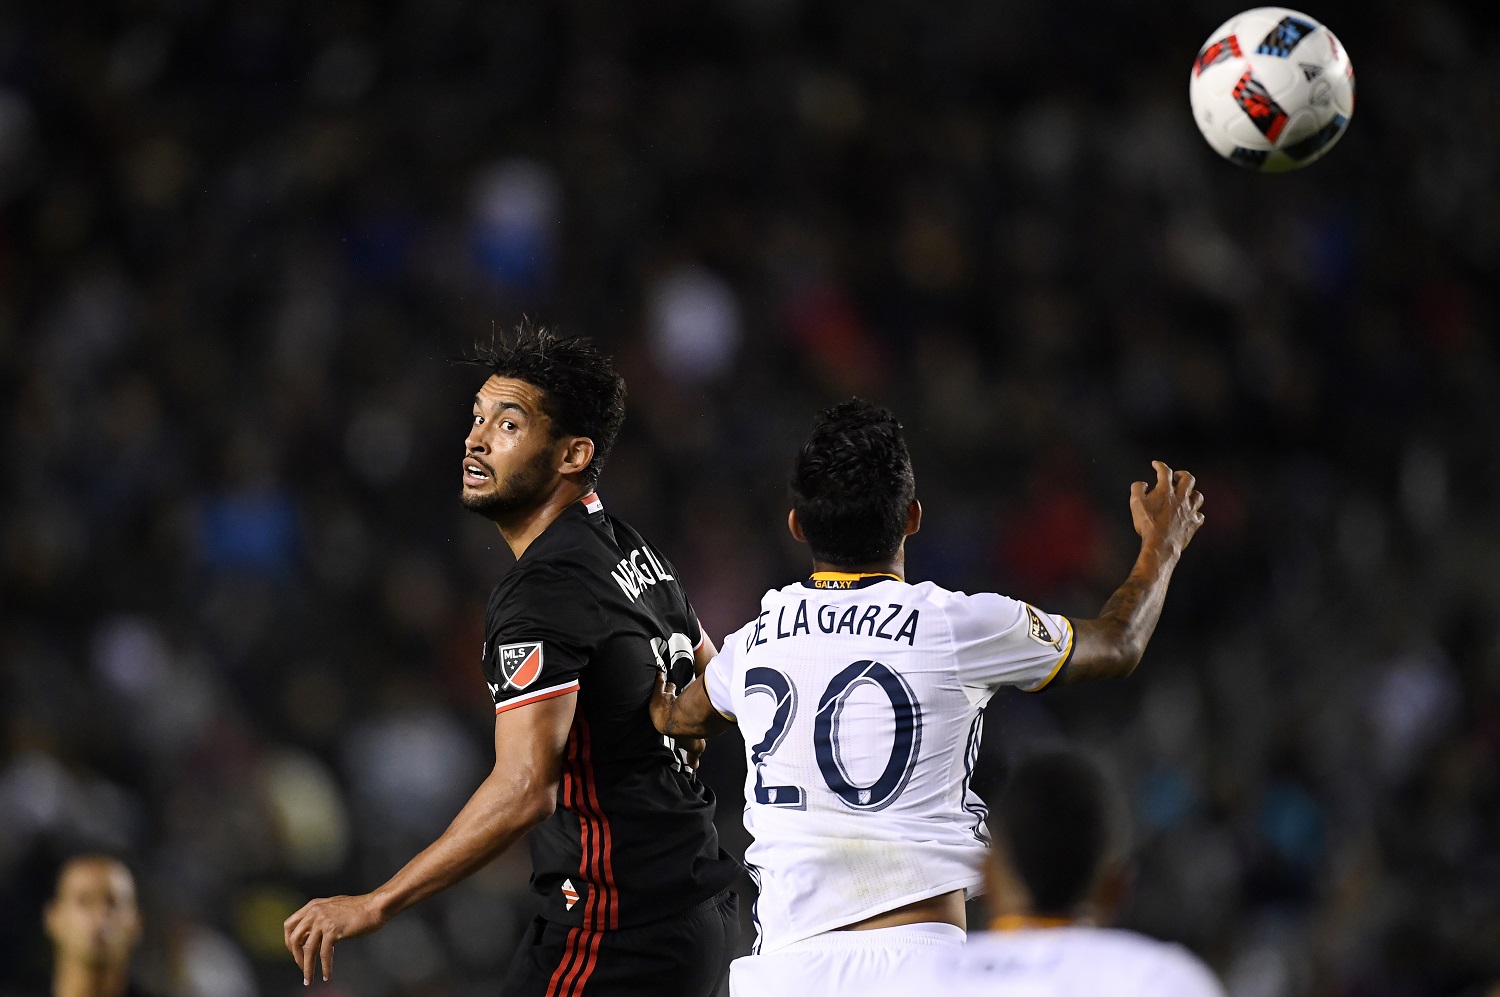 D.C. United midfielder Lamar Neagle, left, and Los Angeles Galaxy defender A. J. DeLaGarza try to head the ball during the first half of an Major League Soccer match, Sunday, March 6, 2016, in Carson, Calif. (AP Photo/Mark J. Terrill)